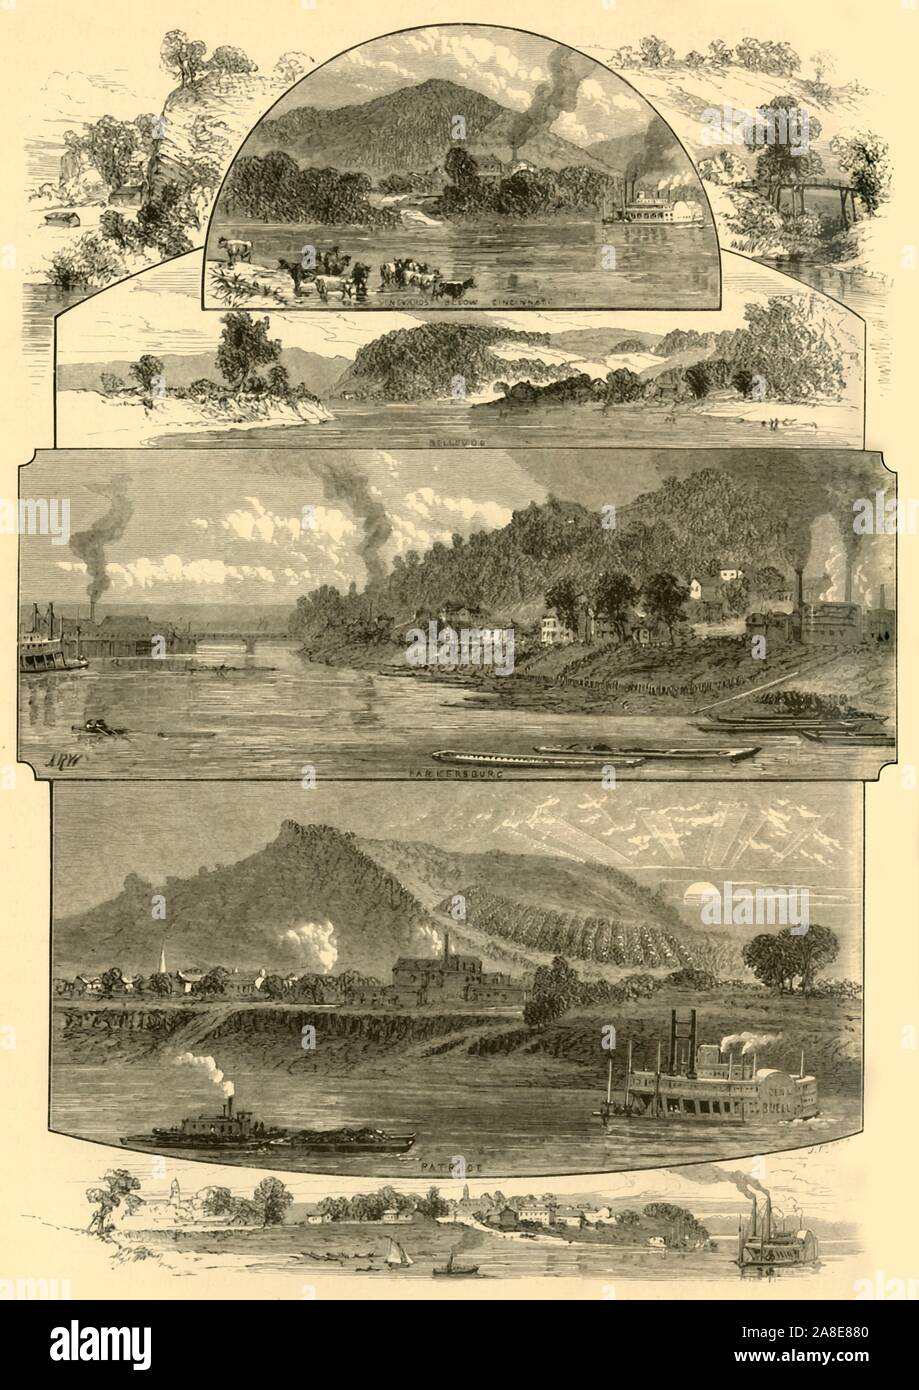 'Scenes on the Ohio, Above and Below Cincinnati', 1874. 'Vineyards below Cincinatti; Parkersburg; Patriot', on the Ohio River, Indiana and Ohio, USA. At bottom right is the 'General Buell' paddle steamer. From &quot;Picturesque America; or, The Land We Live In, A Delineation by Pen and Pencil of the Mountains, Rivers, Lakes...with Illustrations on Steel and Wood by Eminent American Artists&quot; Vol. II, edited by William Cullen Bryant. [D. Appleton and Company, New York, 1874] Stock Photo